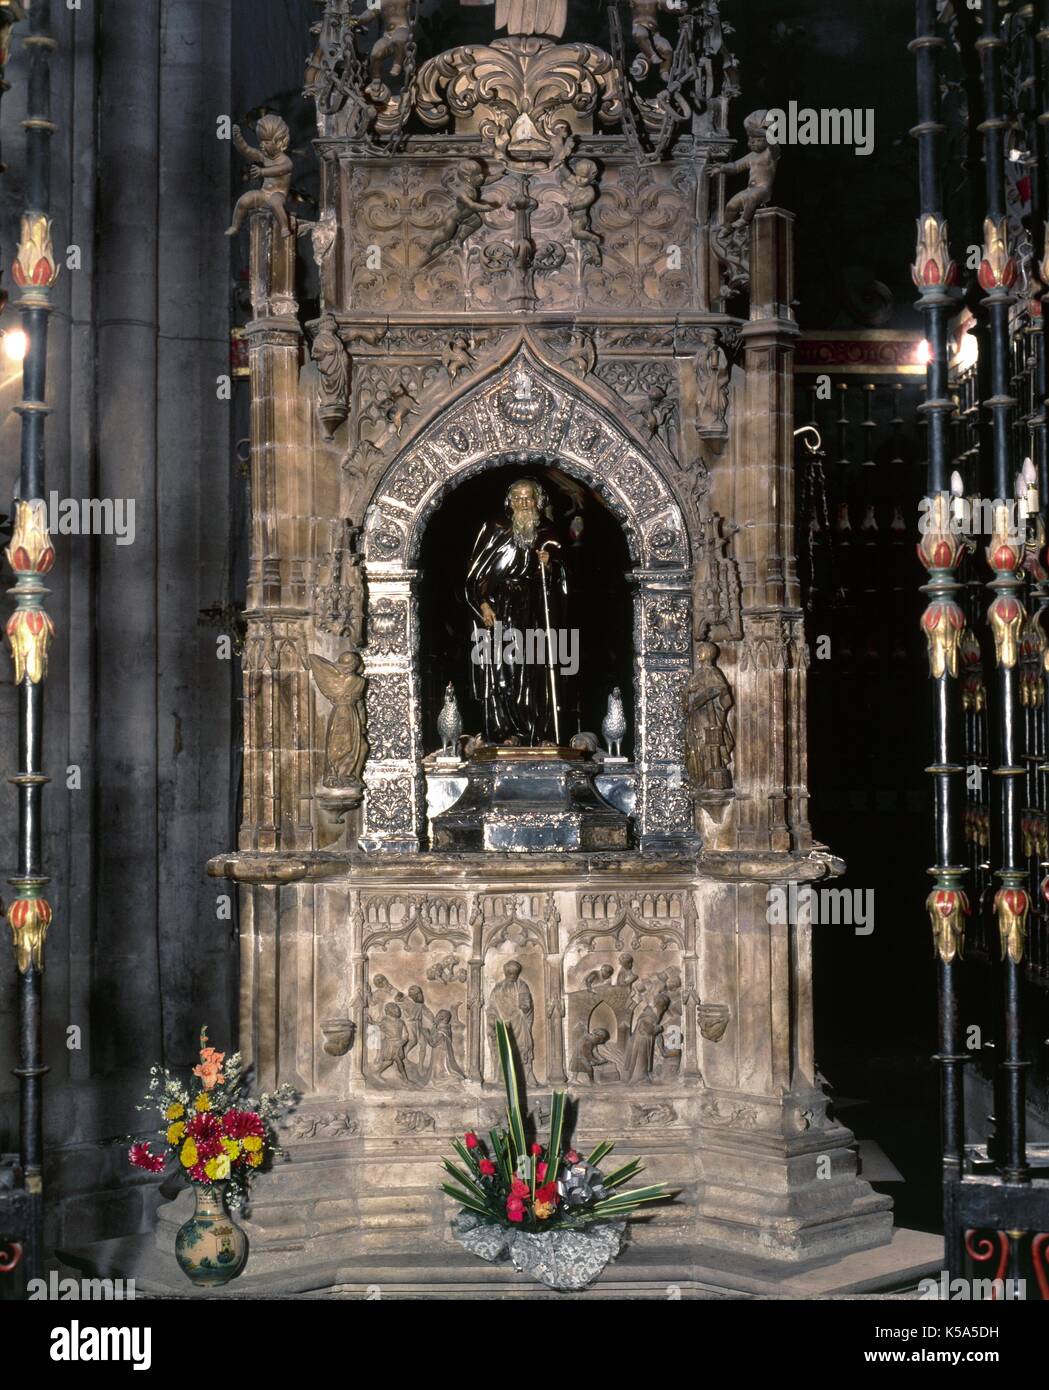 Mausoleum of Santo Domingo. Gothic period. Temple of alabaster designed by Felipe Vigarny in 1513 and made by Rasines, with scenes of the life of the saint. Cathedral of Saint Domingo de la Calzada (La Rioja, Spain). Stock Photo